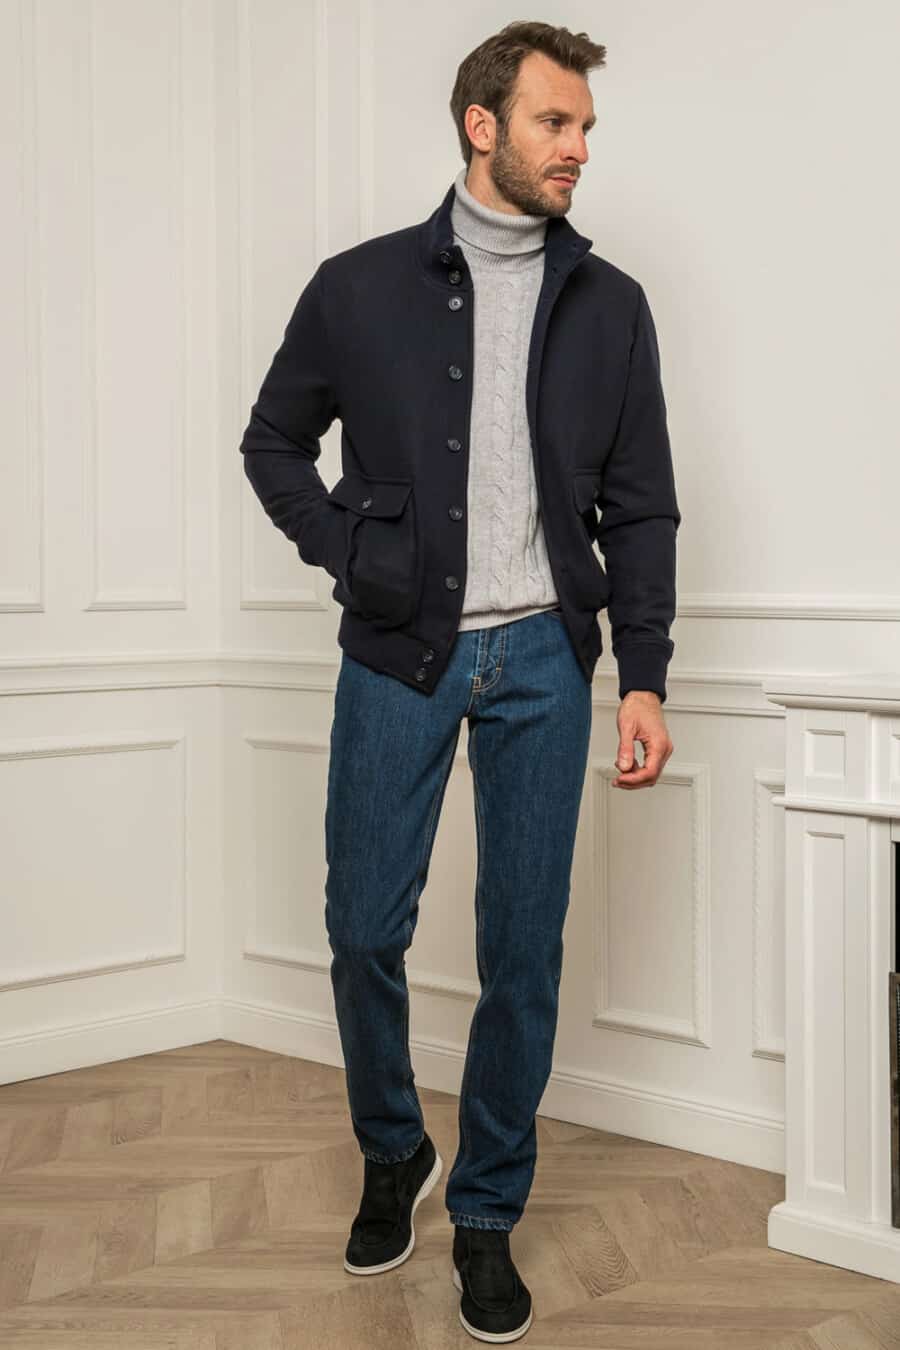 Men's blue jeans, grey cable knit roll neck jumper, blue wool bomber jacket and navy suede chukka boots outfit